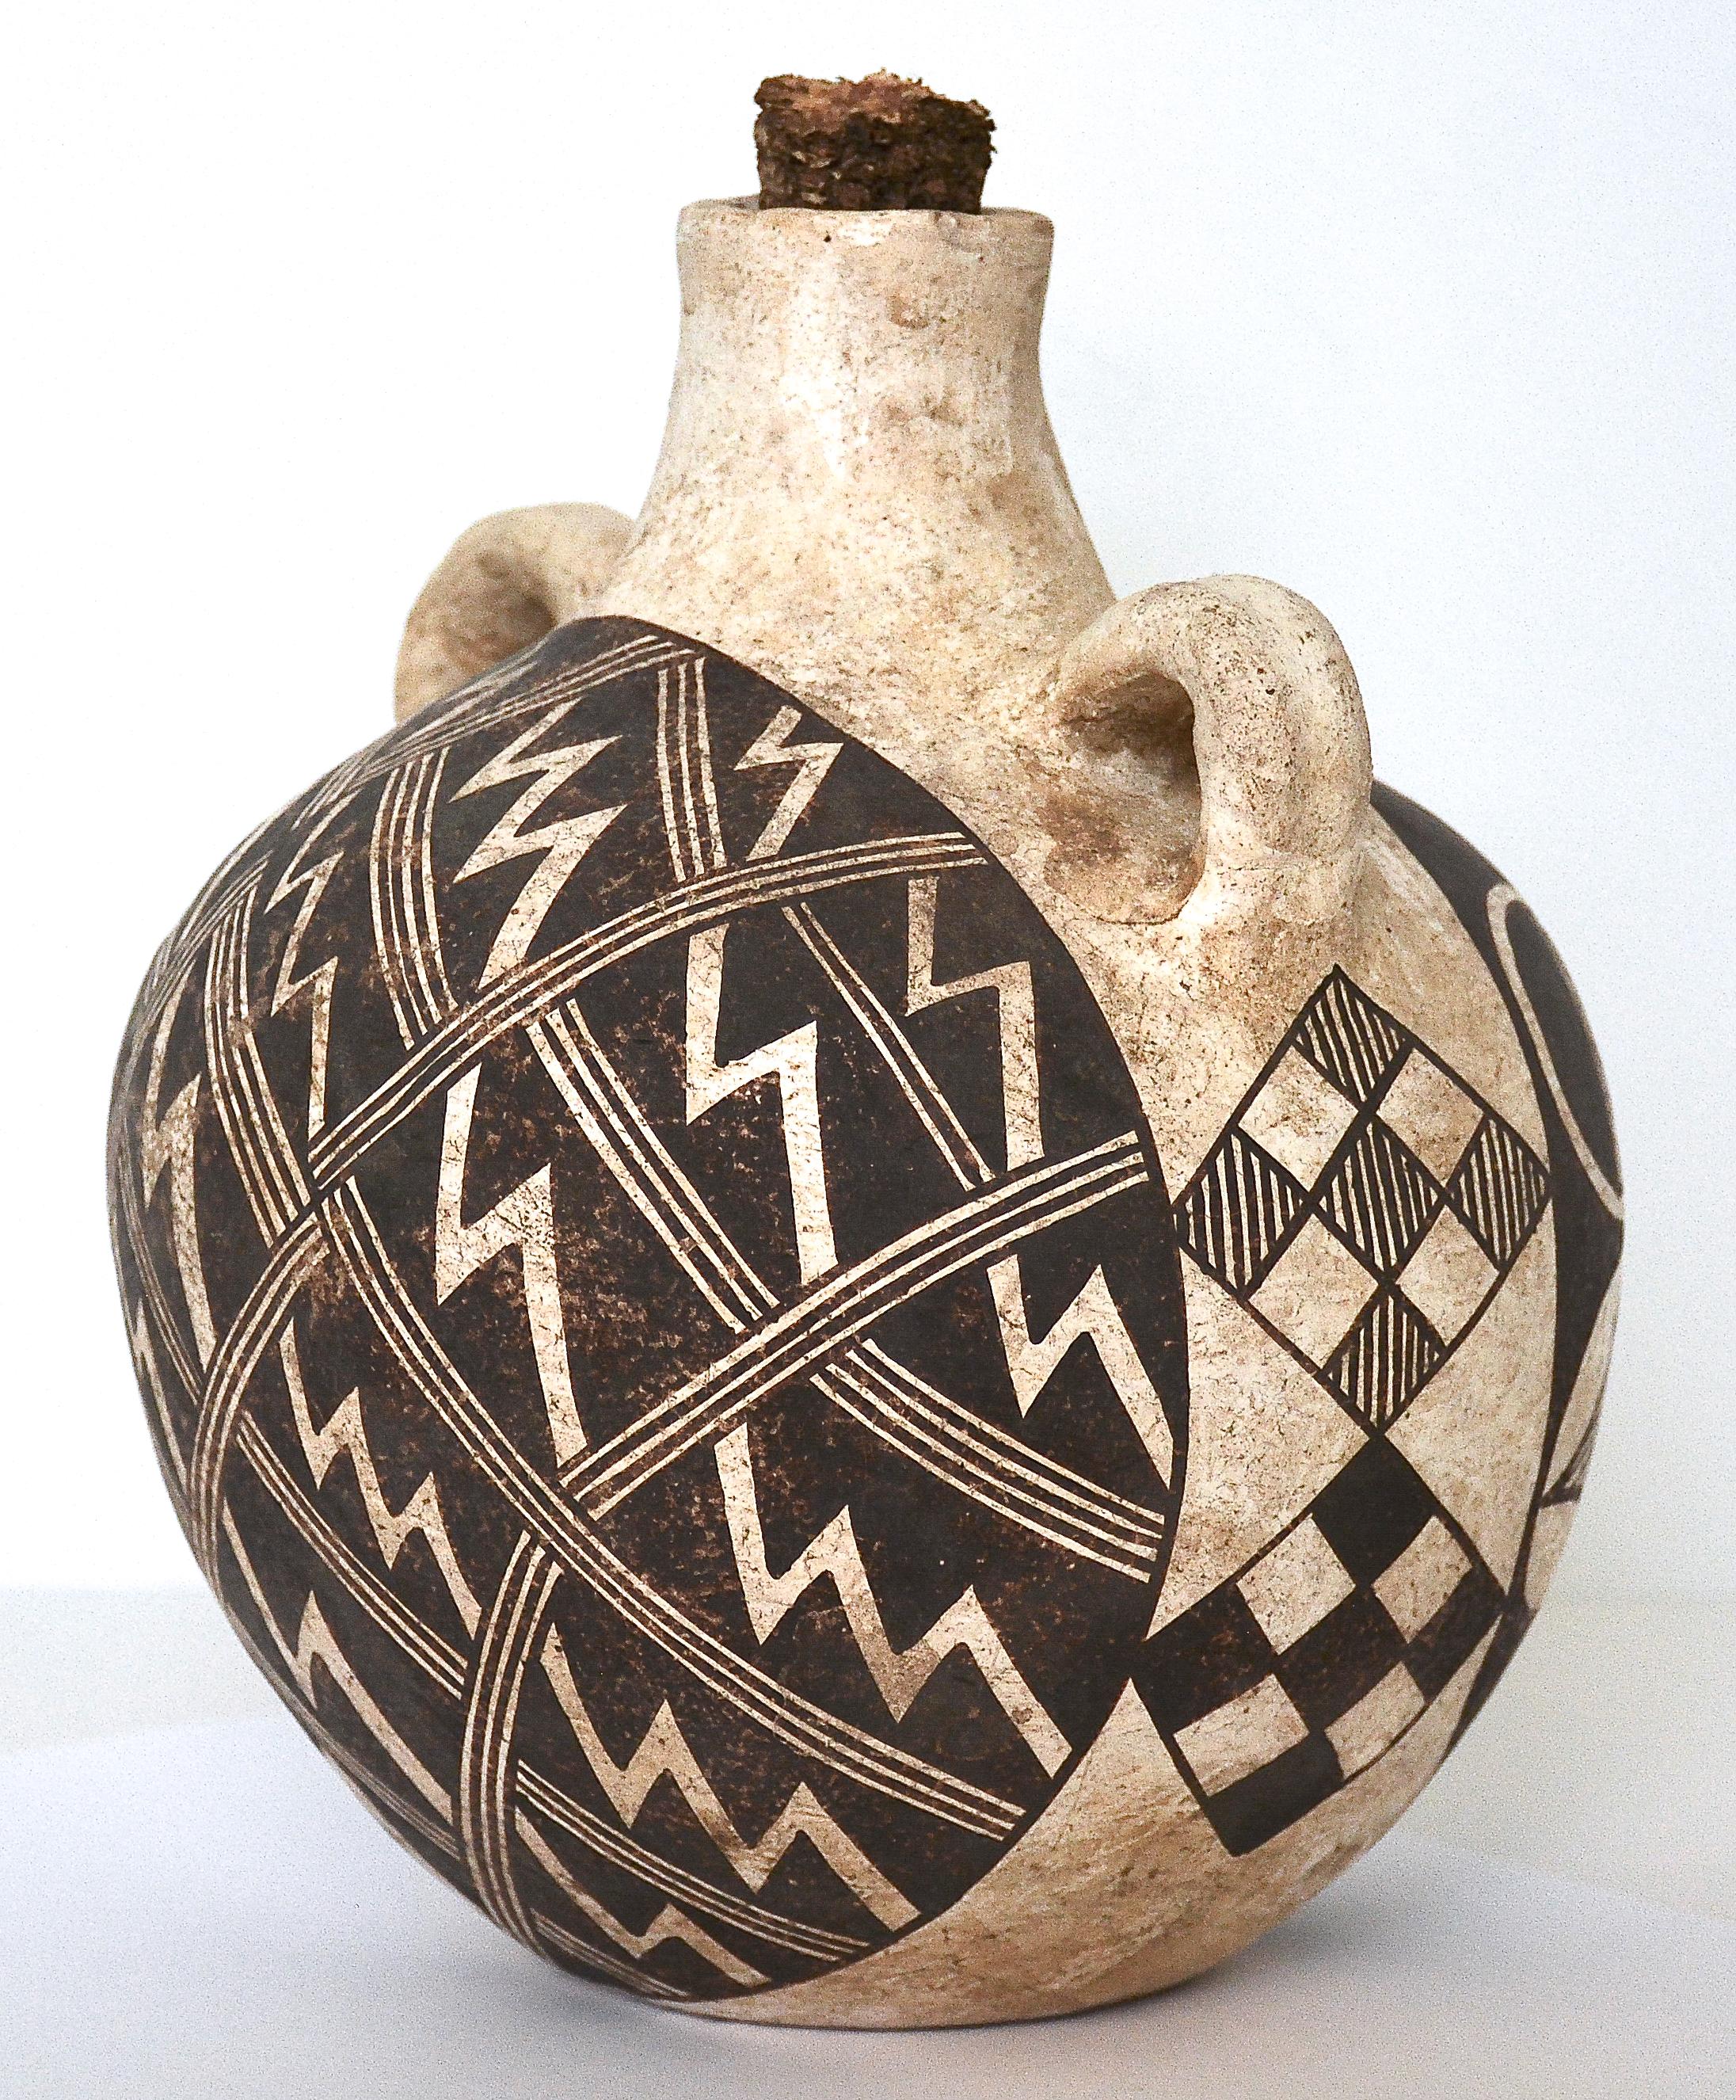 Polychrome pottery canteen
Acoma
1920
Measures: 8 inches height x 6 inches diameter.
Clay, mineral pigments, corn cob. 

A wonderful example of an antique polychrome Acoma Pueblo Pottery Canteen circa 1920, with bifurcated geometric and floral